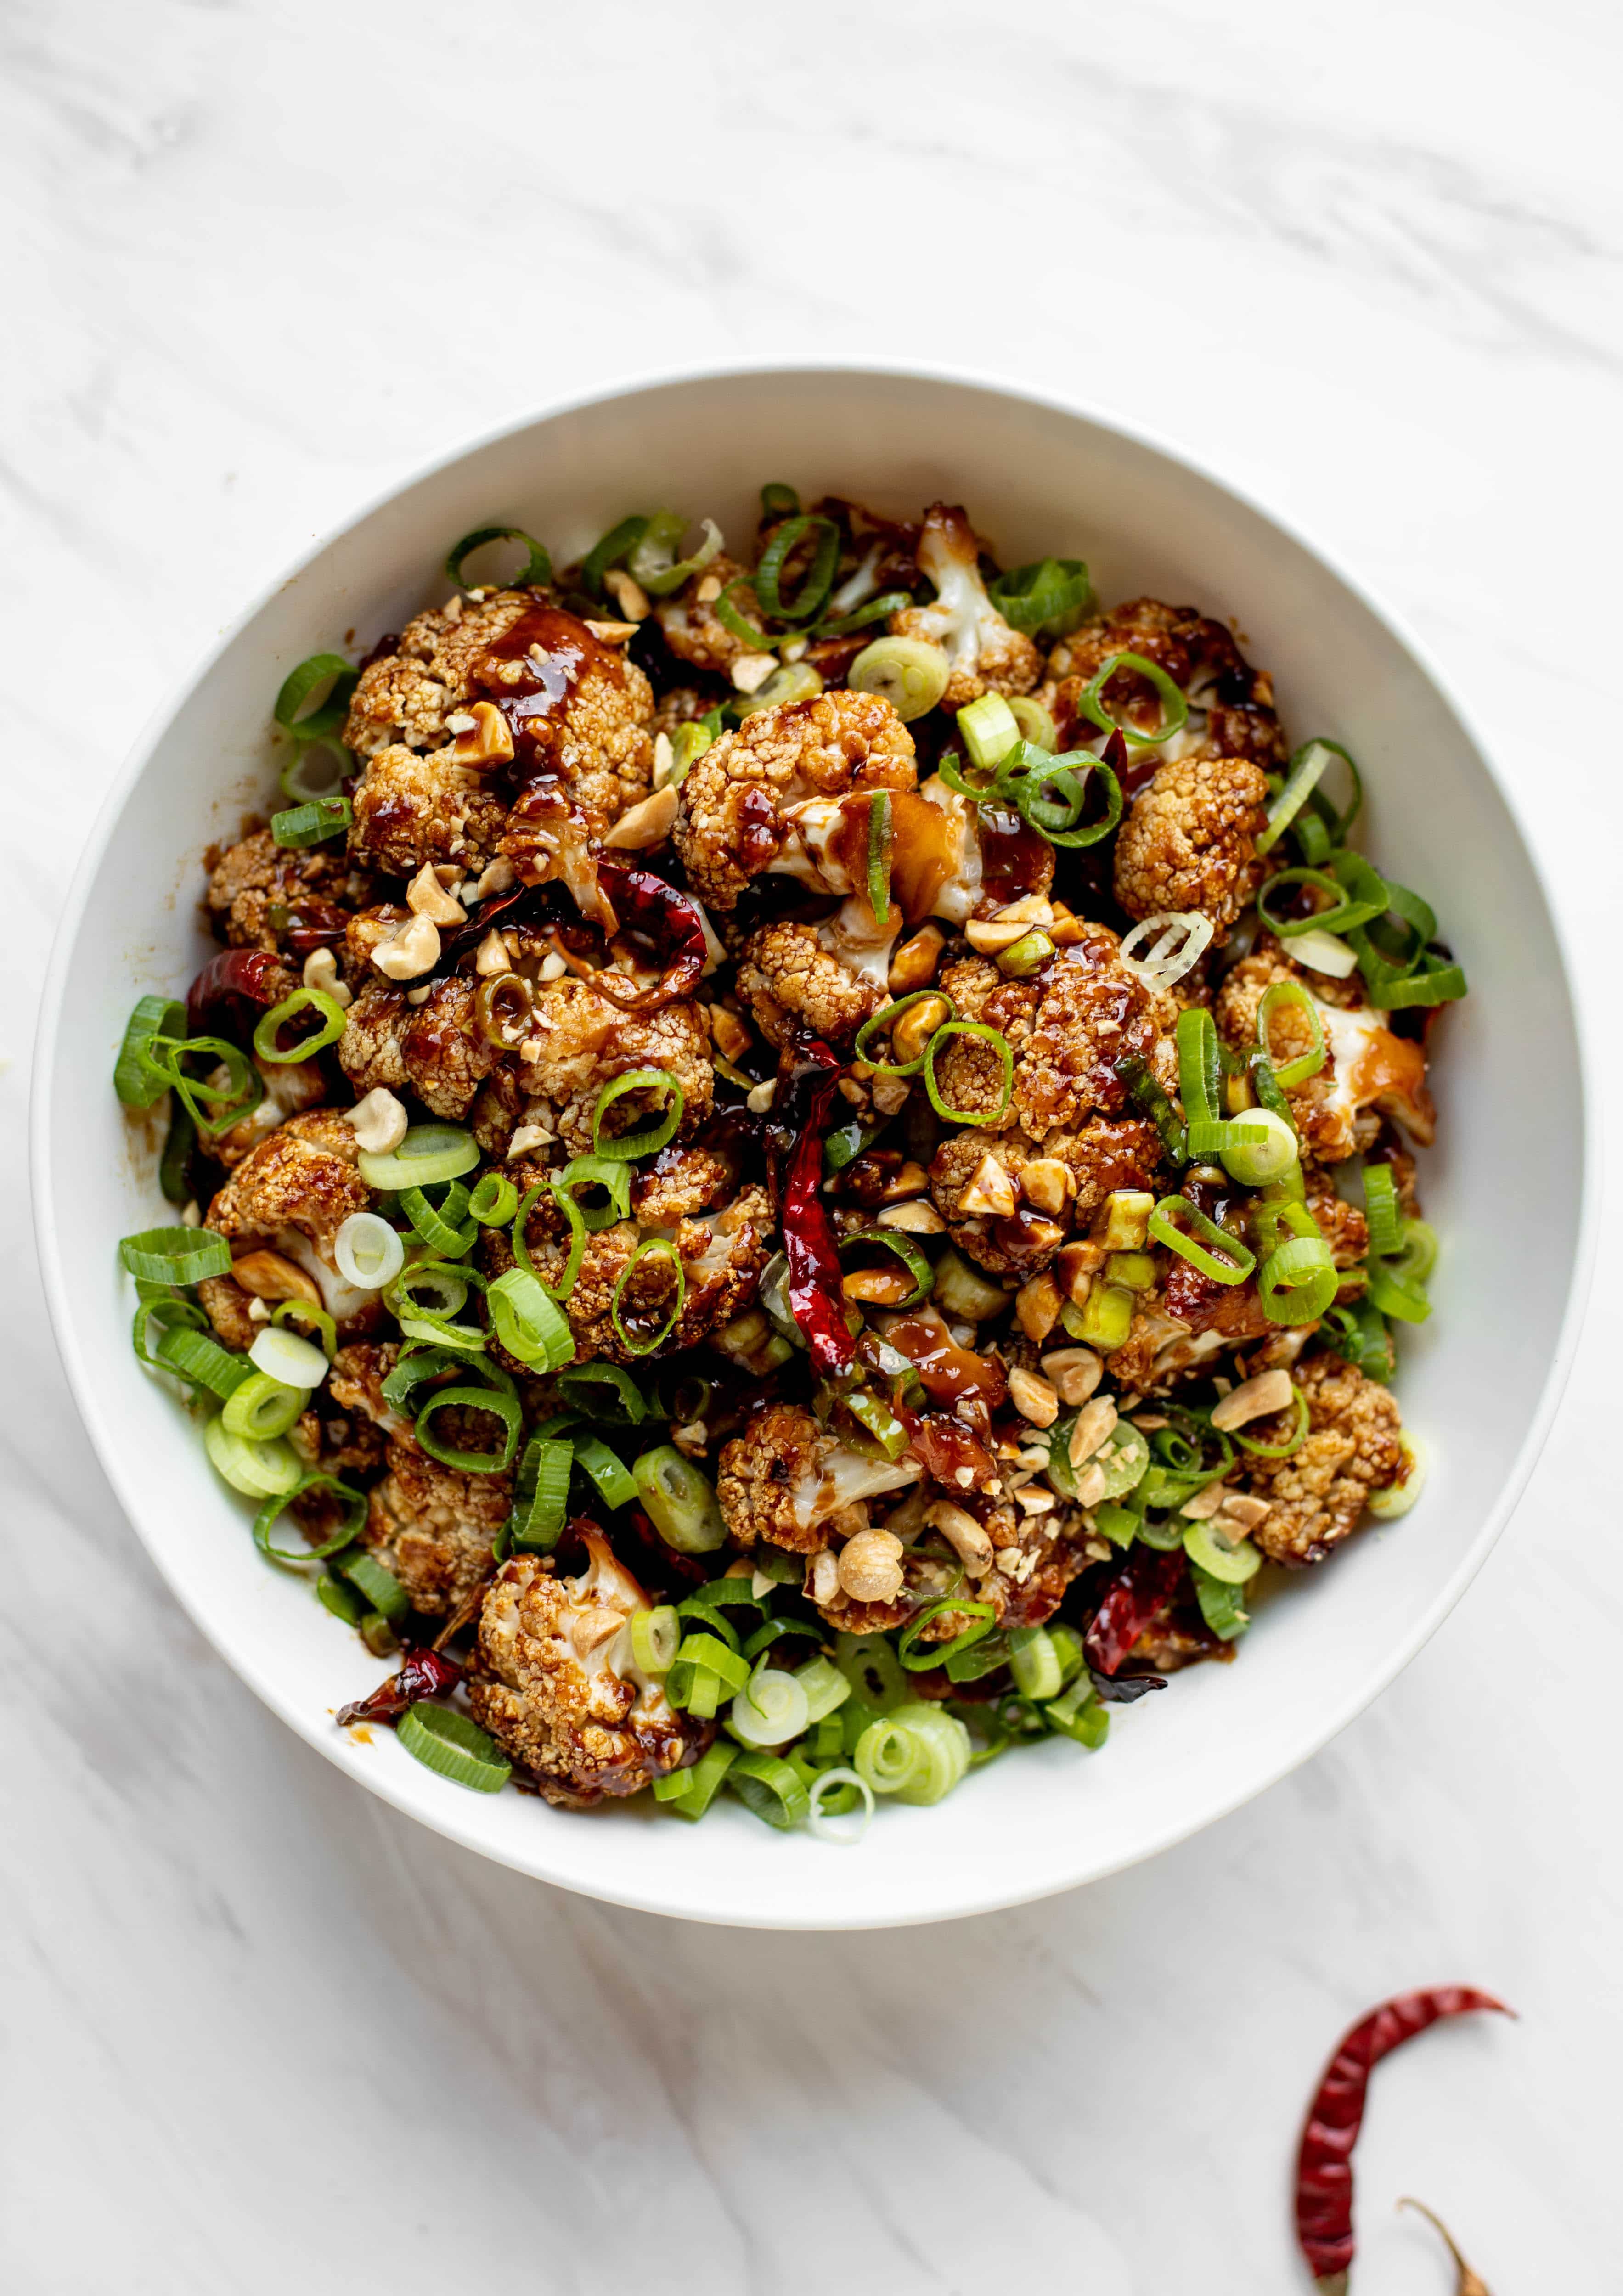 This kung pao cauliflower recipe is roasted on one sheet pan and covered in a delicious sauce! Serve alongside jasmine rice for the best dinner ever.